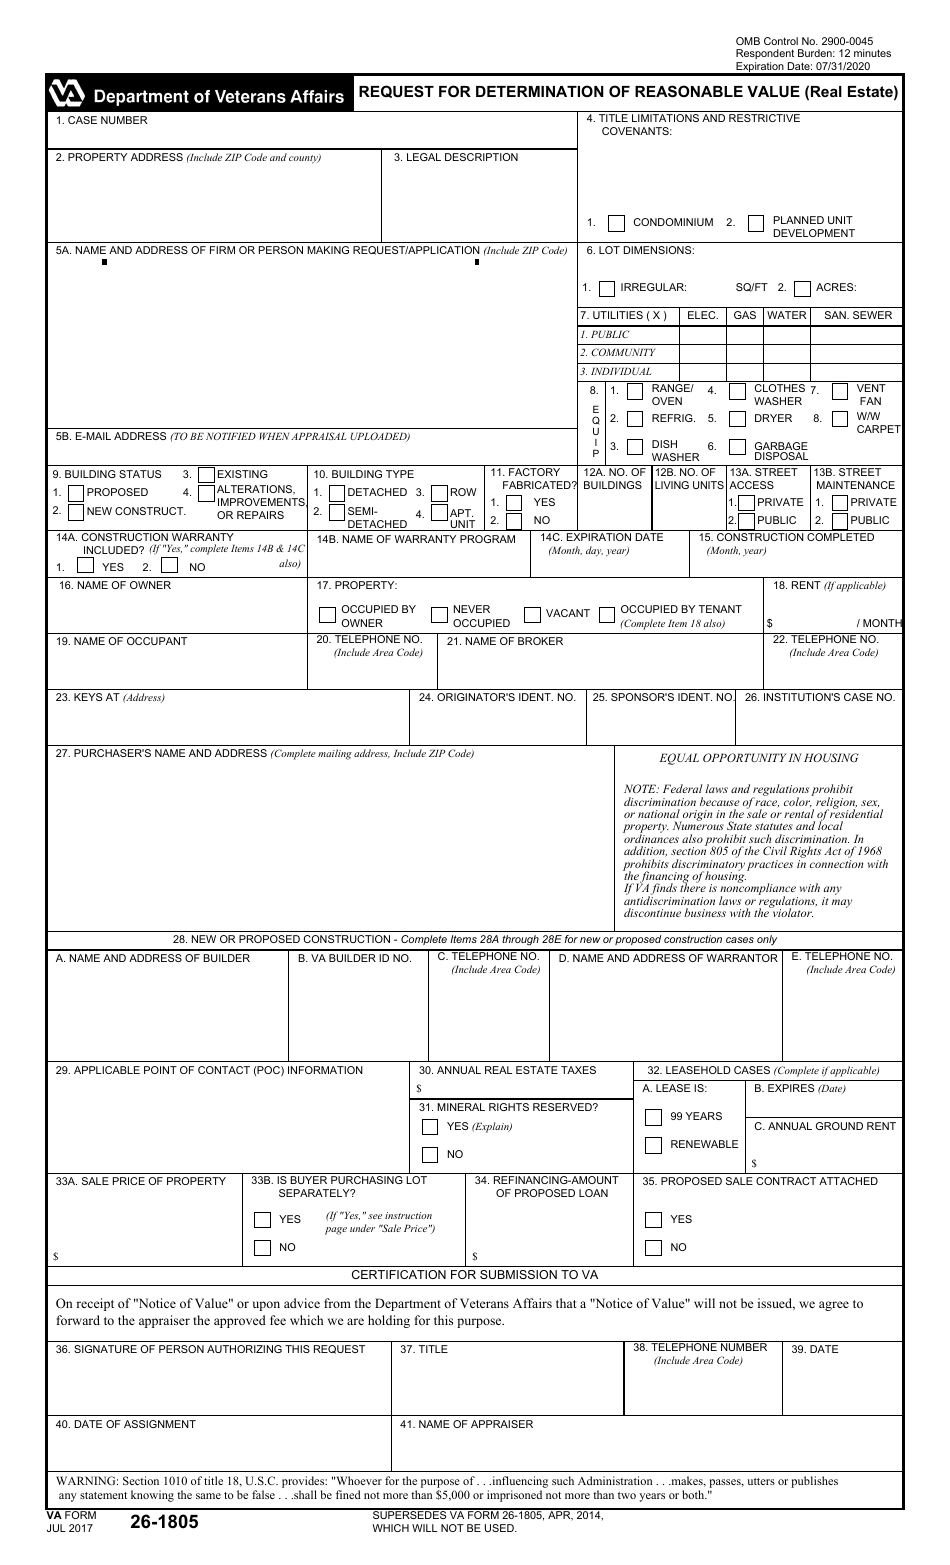 VA Form 26-1805 Request for Determination of Reasonable Value (Real Estate), Page 1